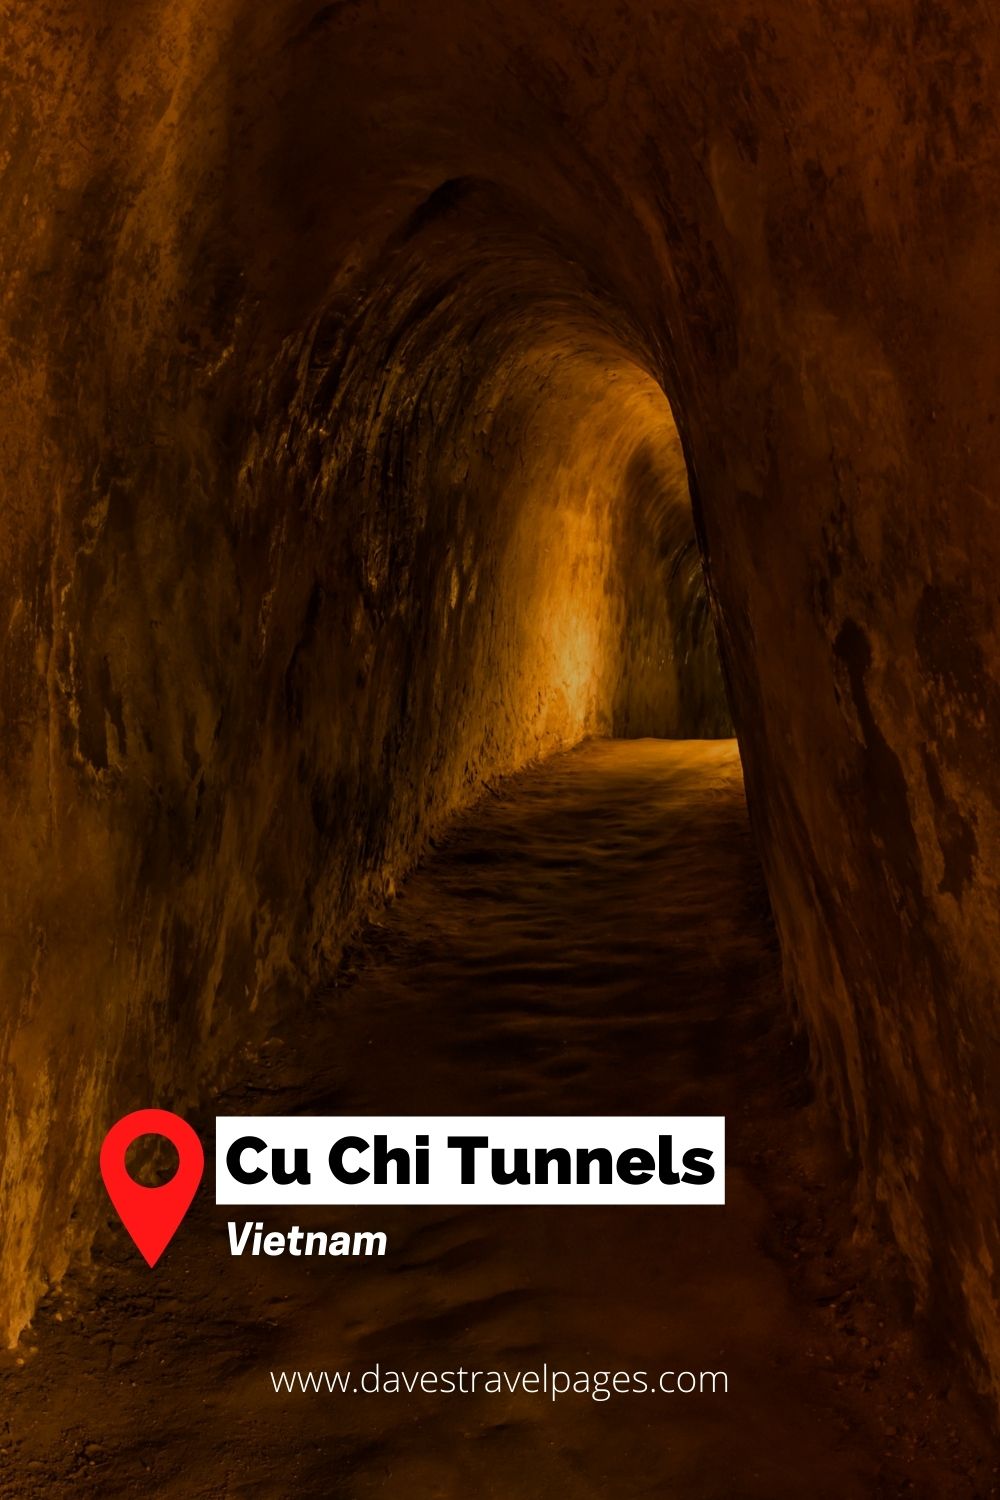 Cu Chi Tunnels in Vietnam - An Historic Monument